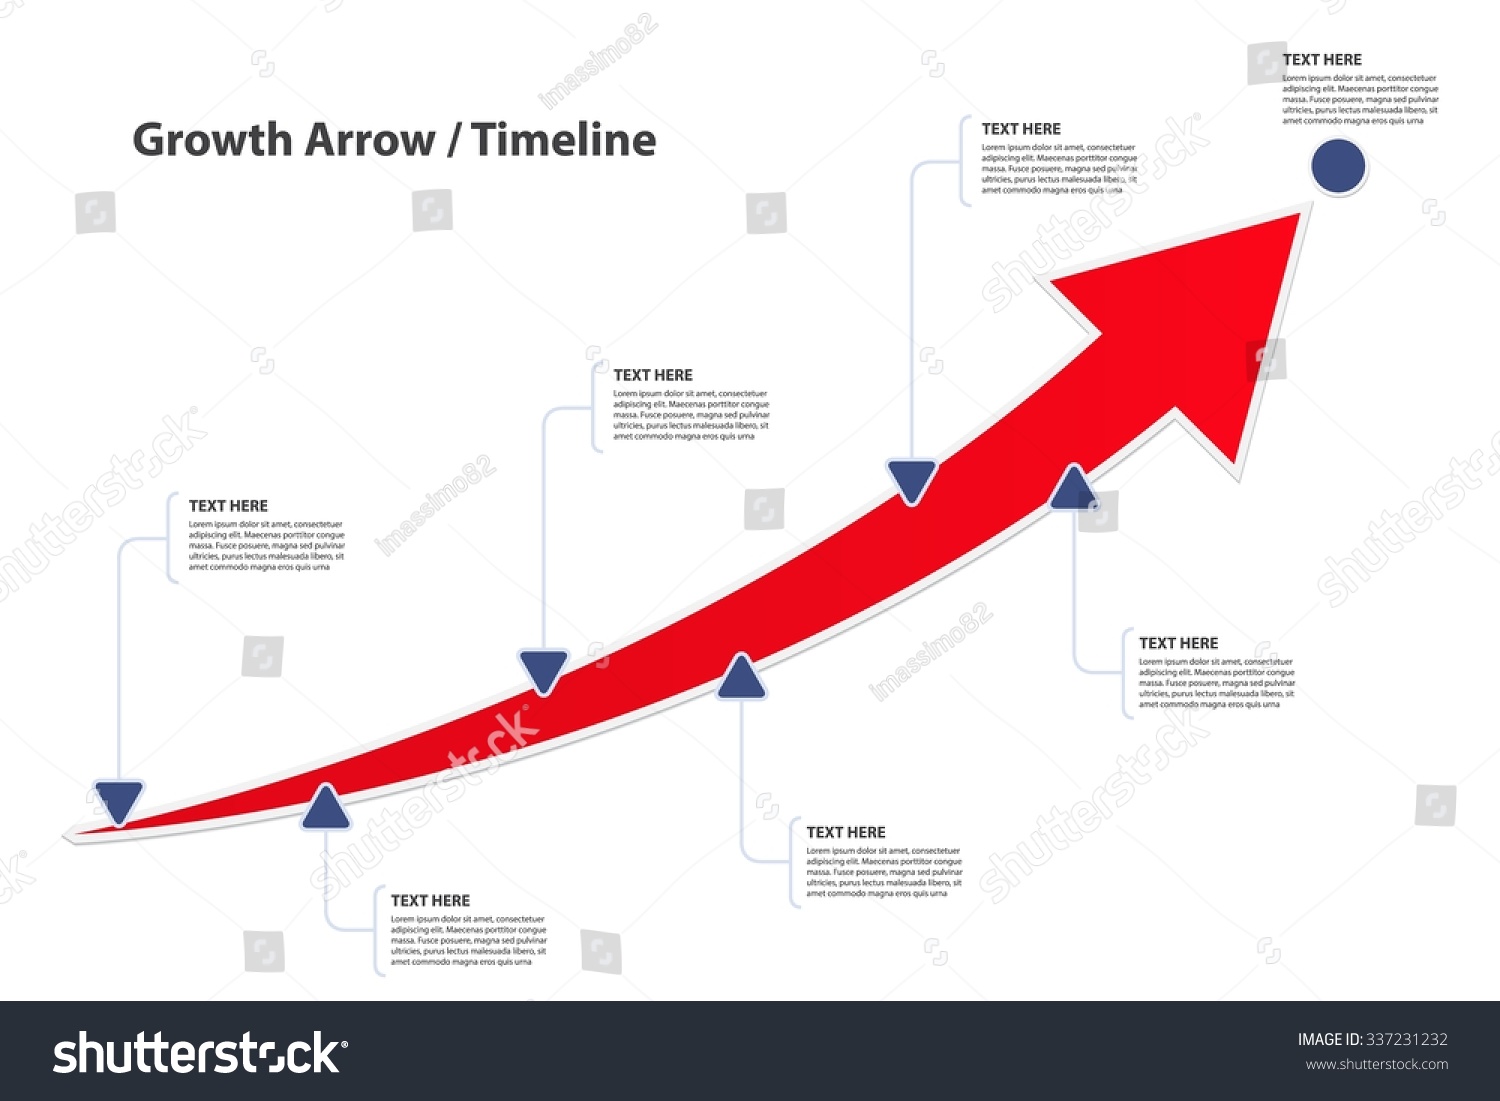 Big Growth Arrow Timeline With Text Options A Way To Success Vector Infographic Template 7403